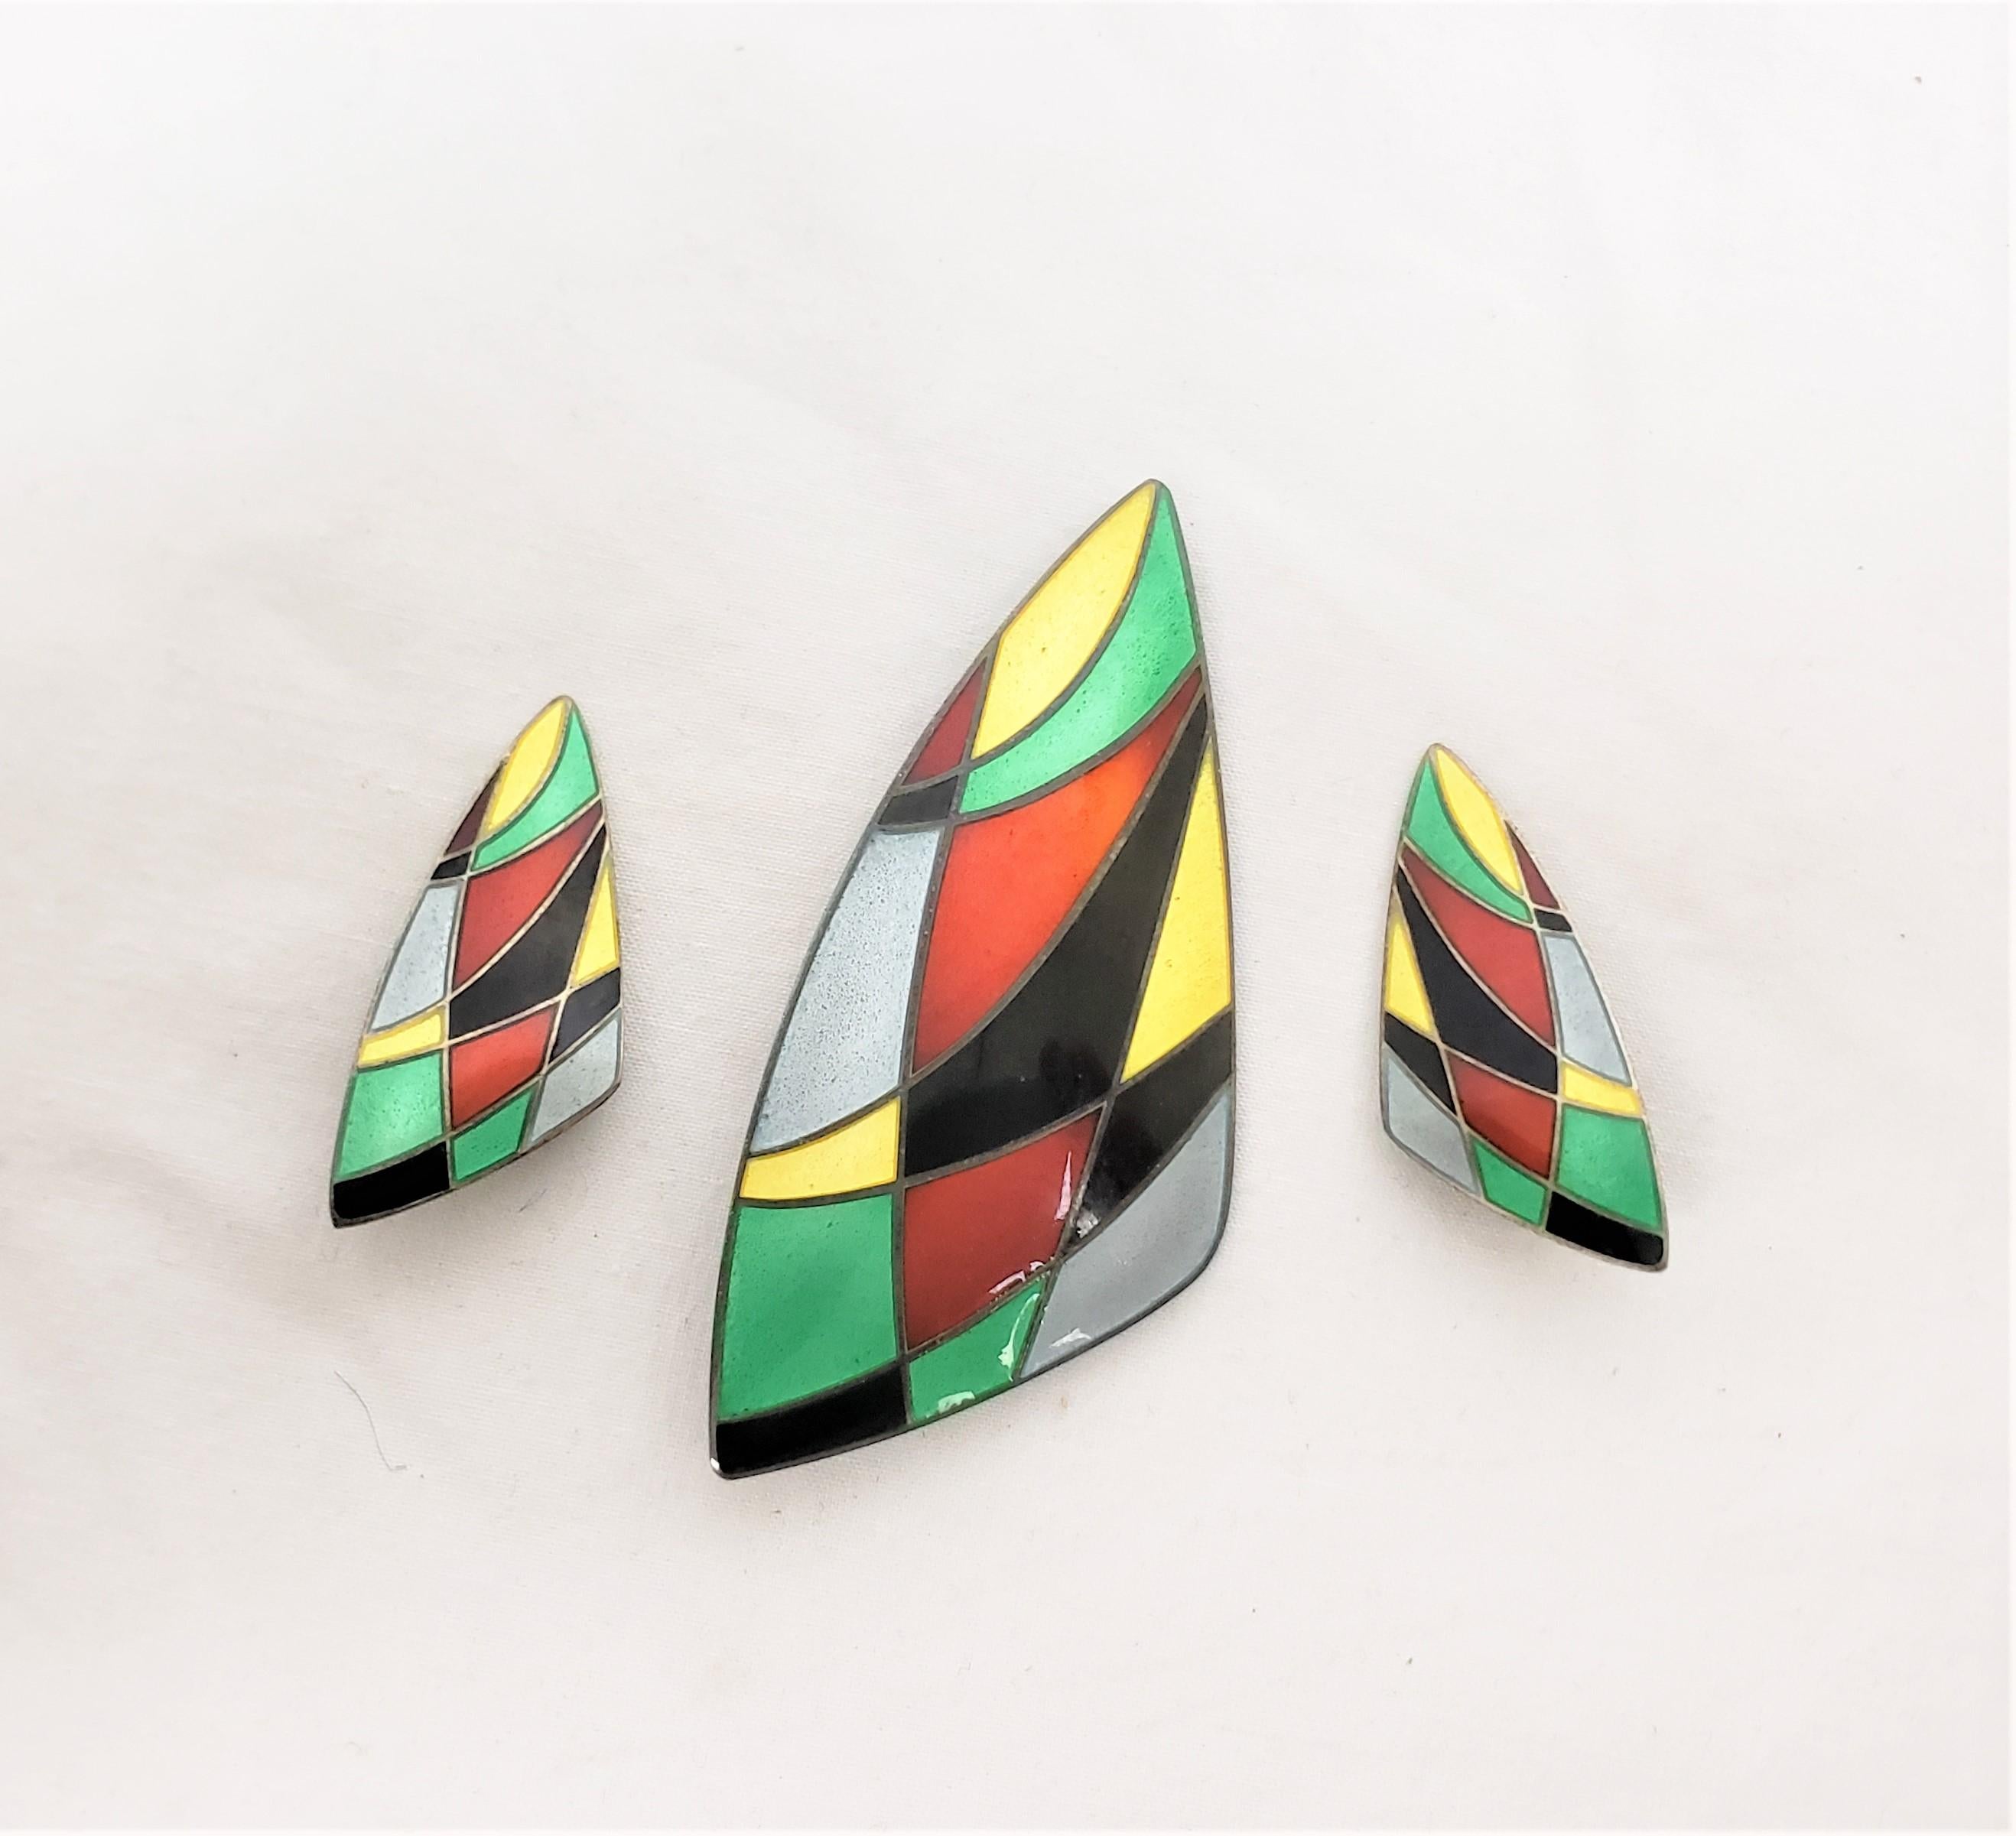 This brooch and earring set was designed by Eigil Jensen for Anton Michelsen of Denmark in approximately 1960 in the period Mid-Century Modern style. The set is composed of sterling silver and have a stylized boat or triangular shape with vibrant